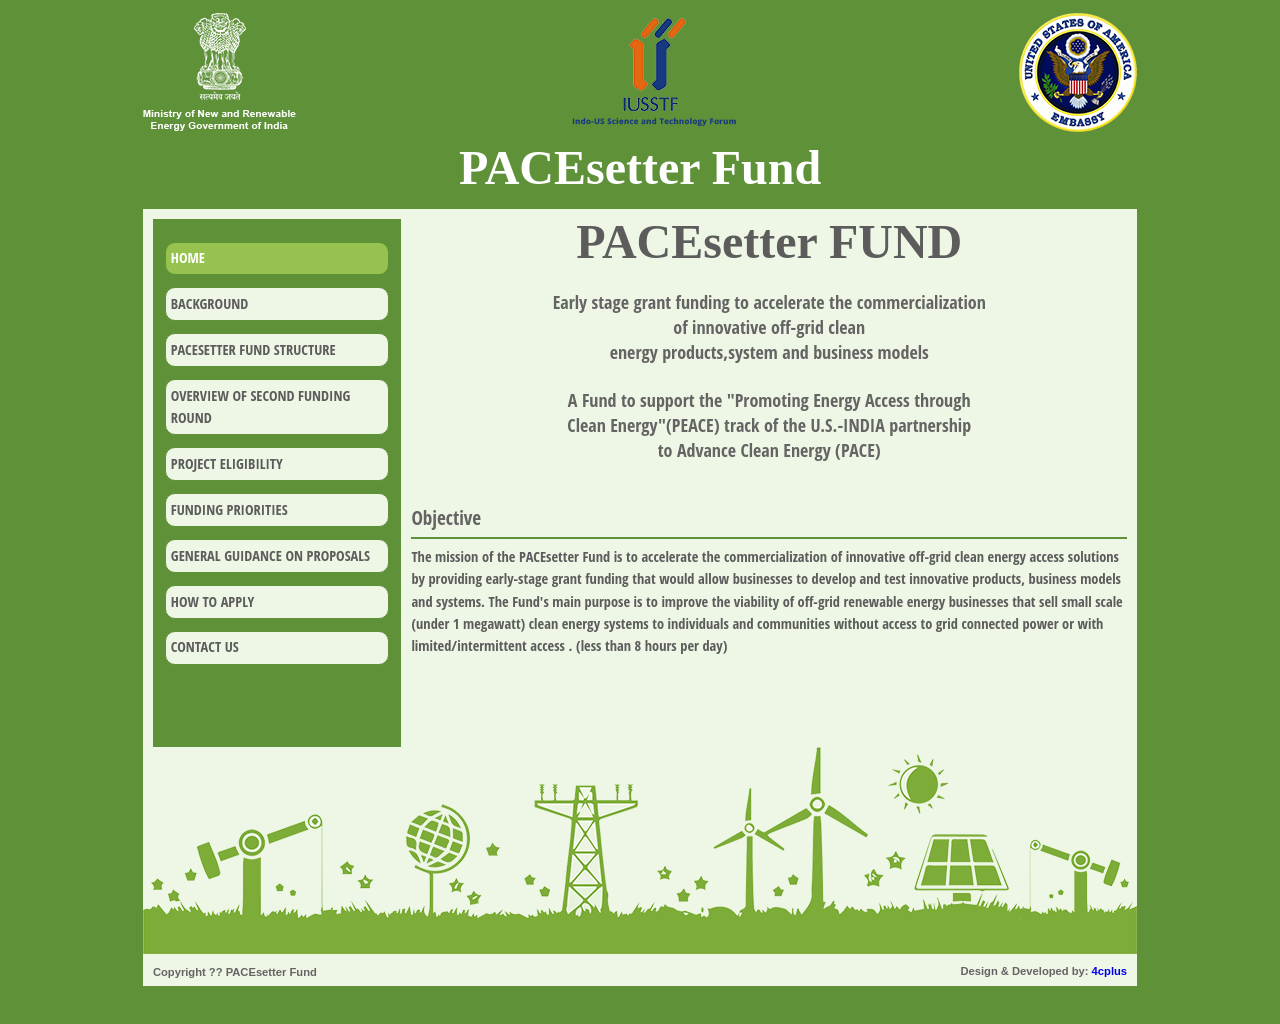 pacesetterfund.org